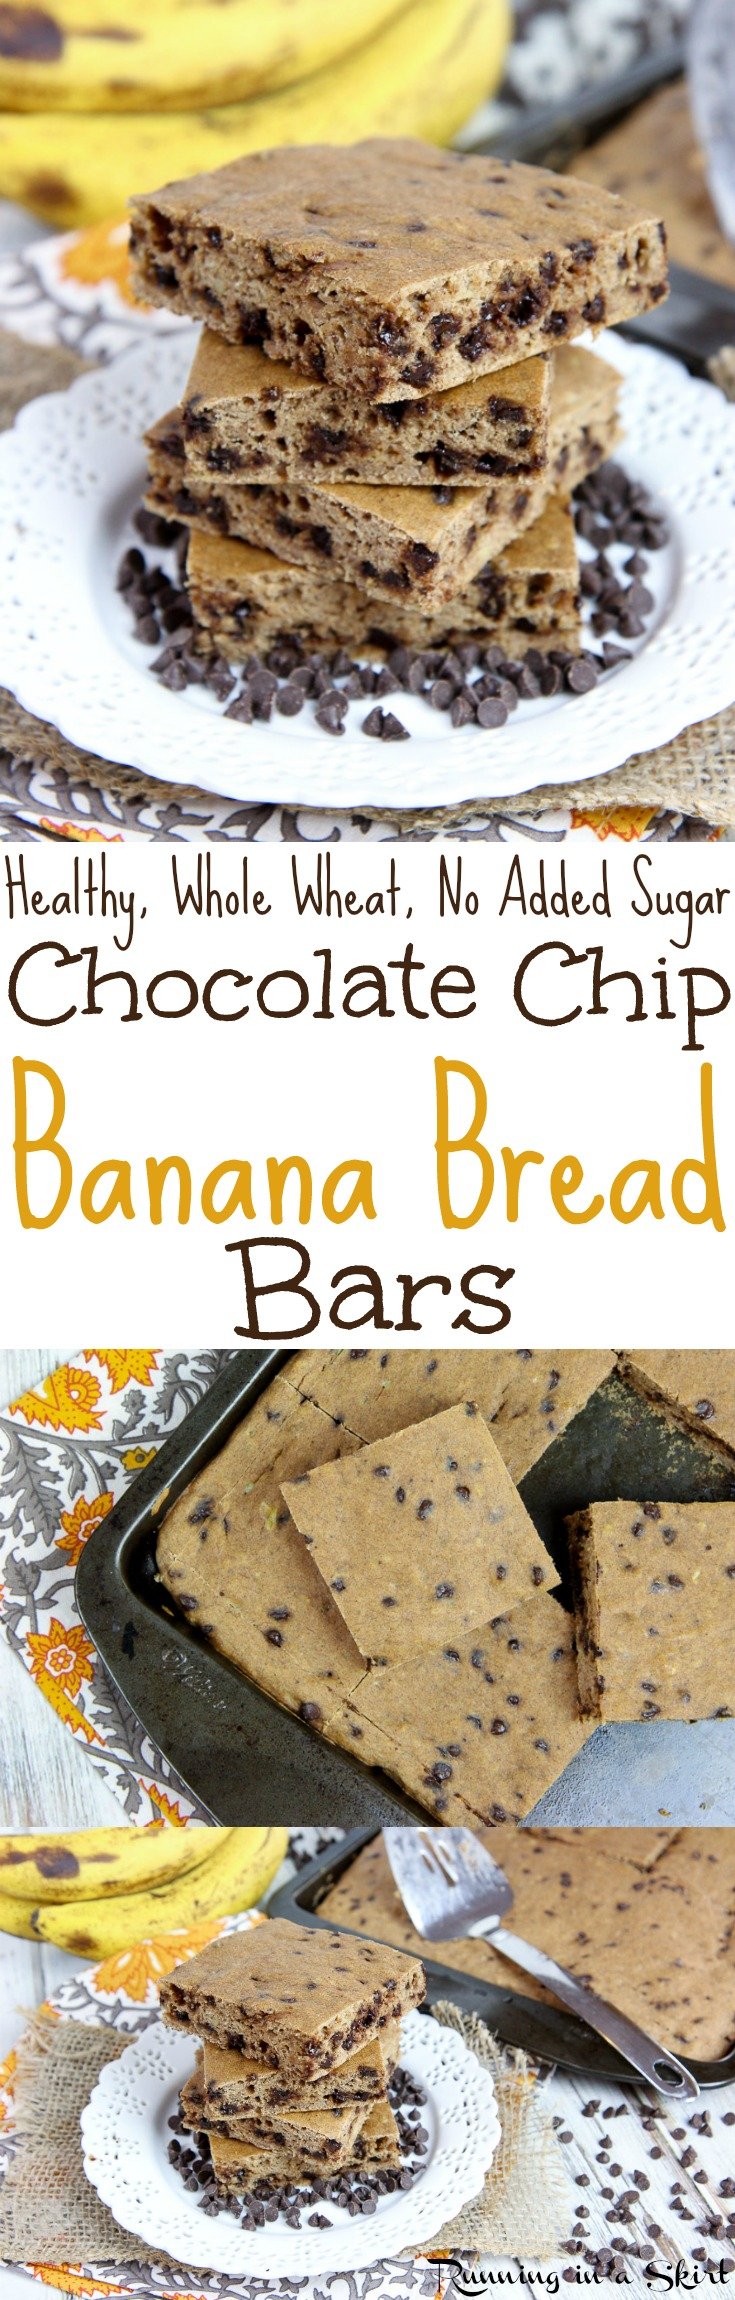 The Best Healthy Chocolate Chip Banana Bread Bars recipe - an easy, simple recipe for desserts or snacks... the perfect sweet treats!  Dairy free & added sugar free. / Running in a Skirt via @juliewunder